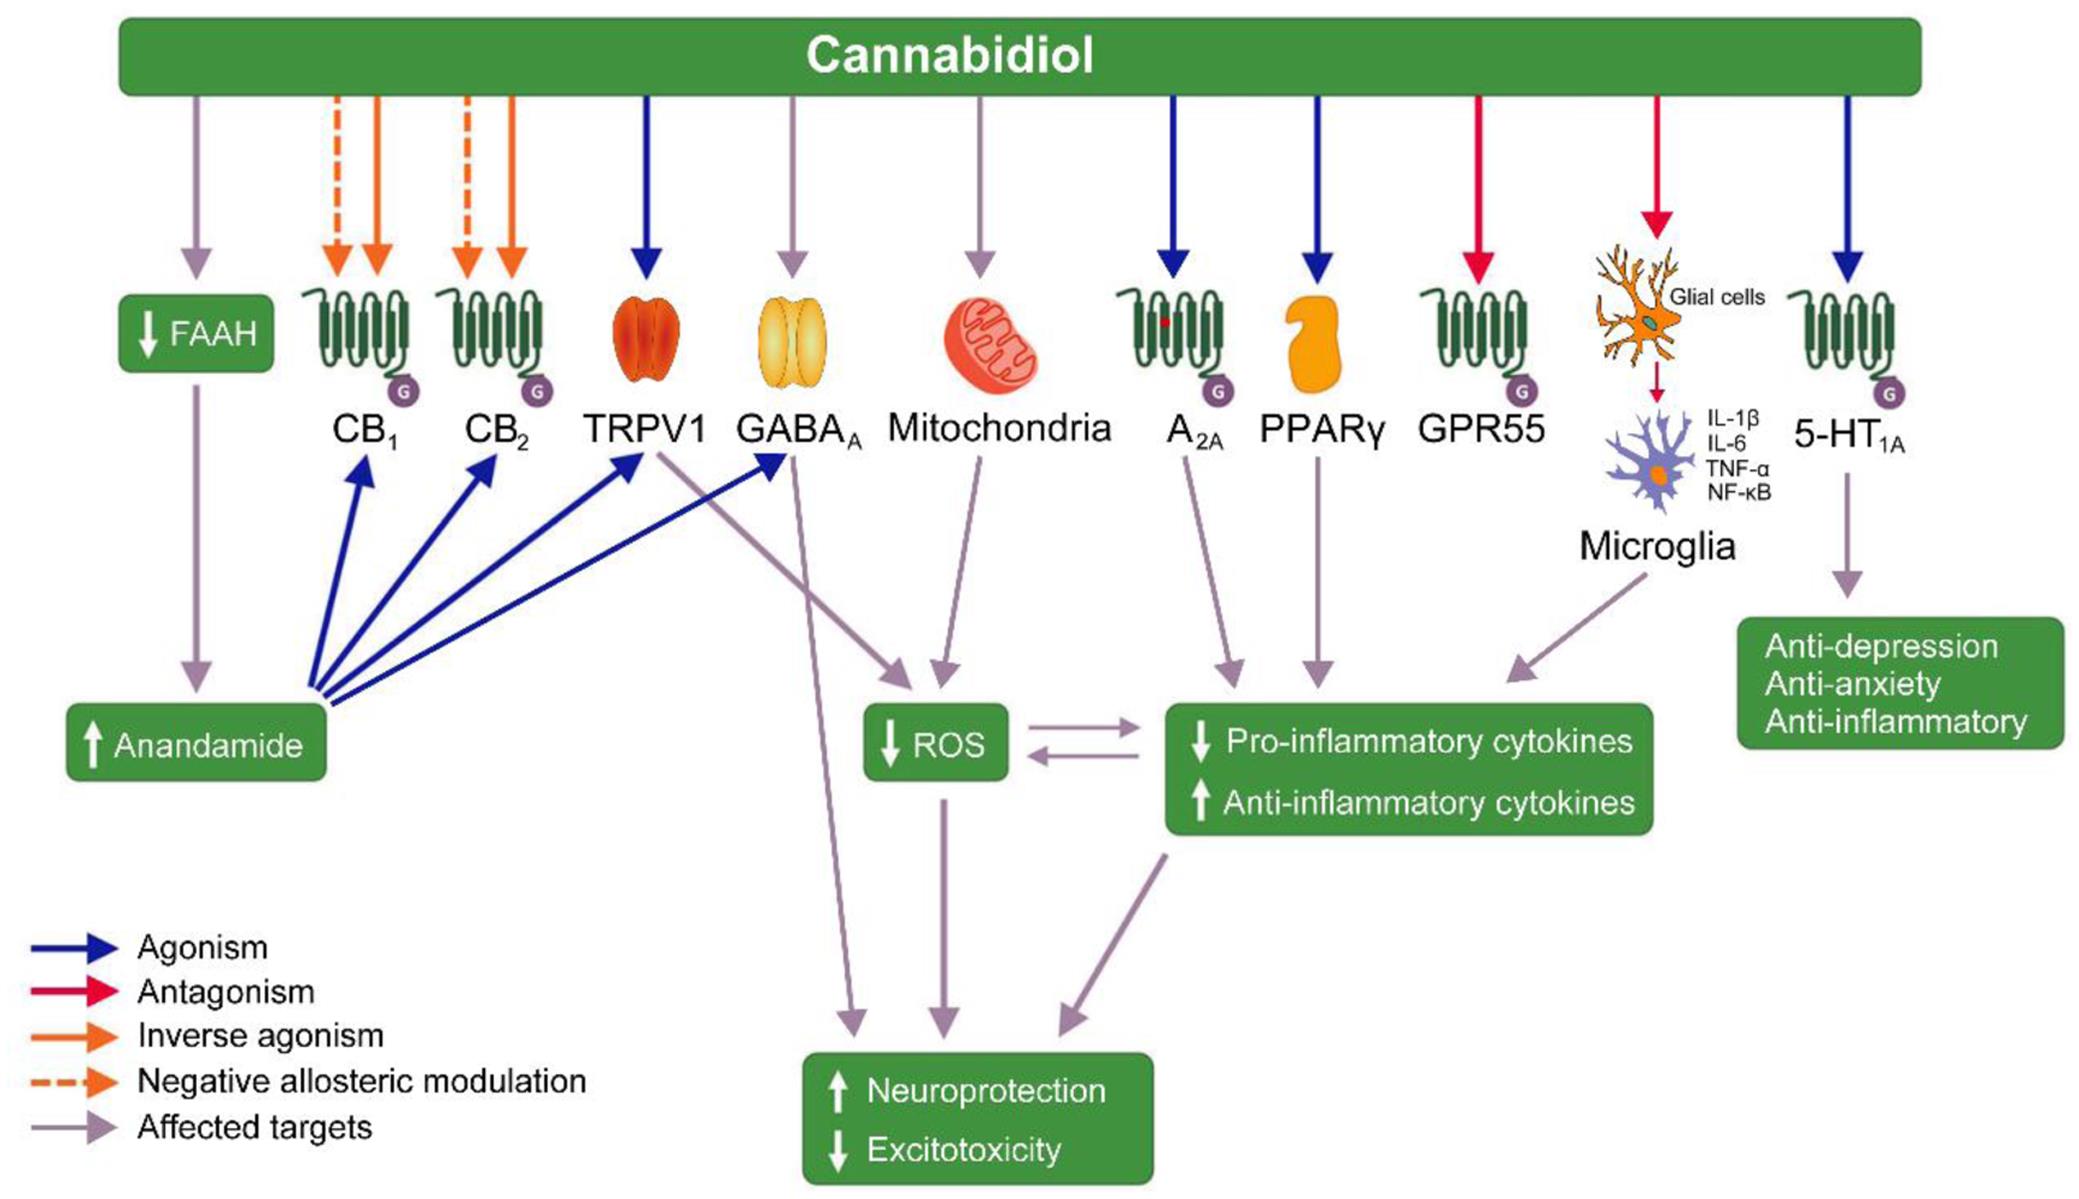 The cannabidiol (CBD) mechanism of action includes: (1) agonistic activity toward the transient receptor potential vanilloid type 1 (TRPV1), the peroxisome proliferator activated receptor ɣ (PPARɣ), and the serotonin<sub>1A</sub> (5-HT<sub>1A</sub>) receptor; (2) antagonist activity at the G-protein coupled receptor GPR55; (3) antagonist to CB1 and CB2Rs in addition to acting as a reverse agonist and negative allosteric modulator; (4) antagonist of FAAH leading to increased anandamide (AEA), which goes on to activate the CB1, CB2, and TRPV1 receptors.; (5) direct action on the GABA<sub>A</sub> receptor (also influenced by AEA), leading to neuroprotection; (6) increased mitochondrial activity leading to antioxidant and anti-inflammatory action.